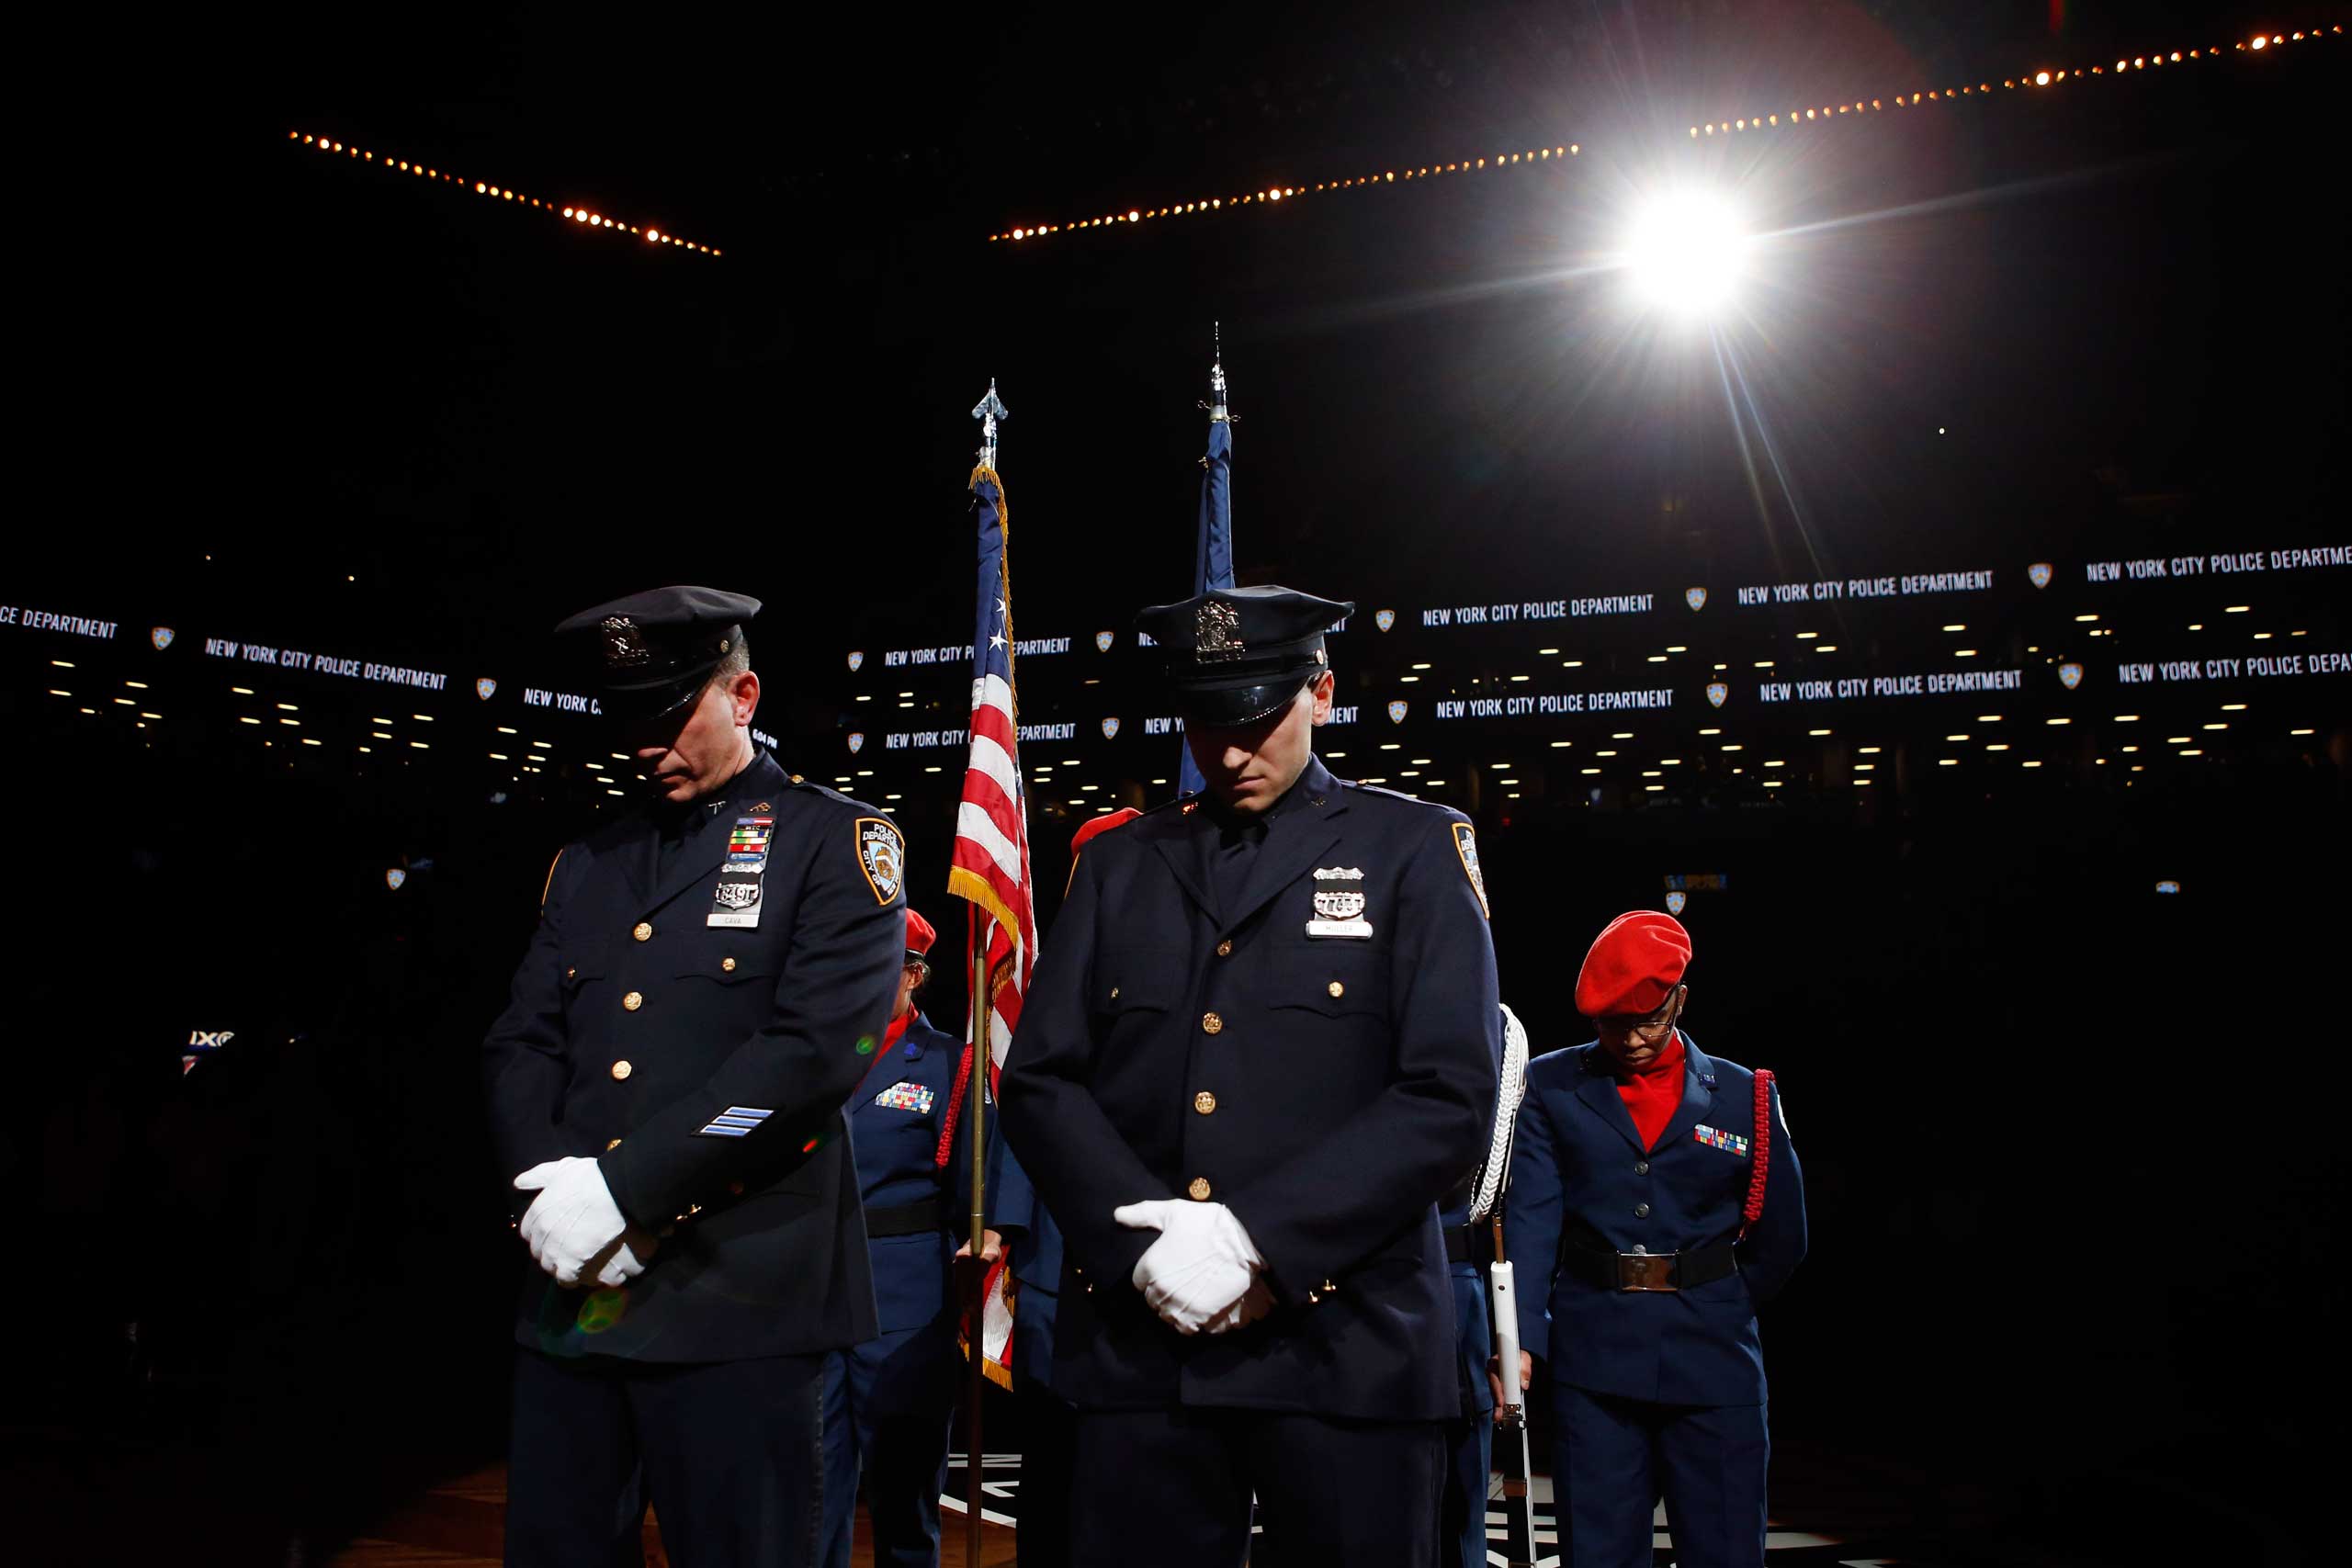 New York Police Department officers Mark Cava, left, and Jason Muller participate in a moment of silence for two slain NYPD officers before an NBA basketball game between the Brooklyn Nets and the Detroit Pistons on Dec. 21, 2014, in New York City. (Jason DeCrow—AP)